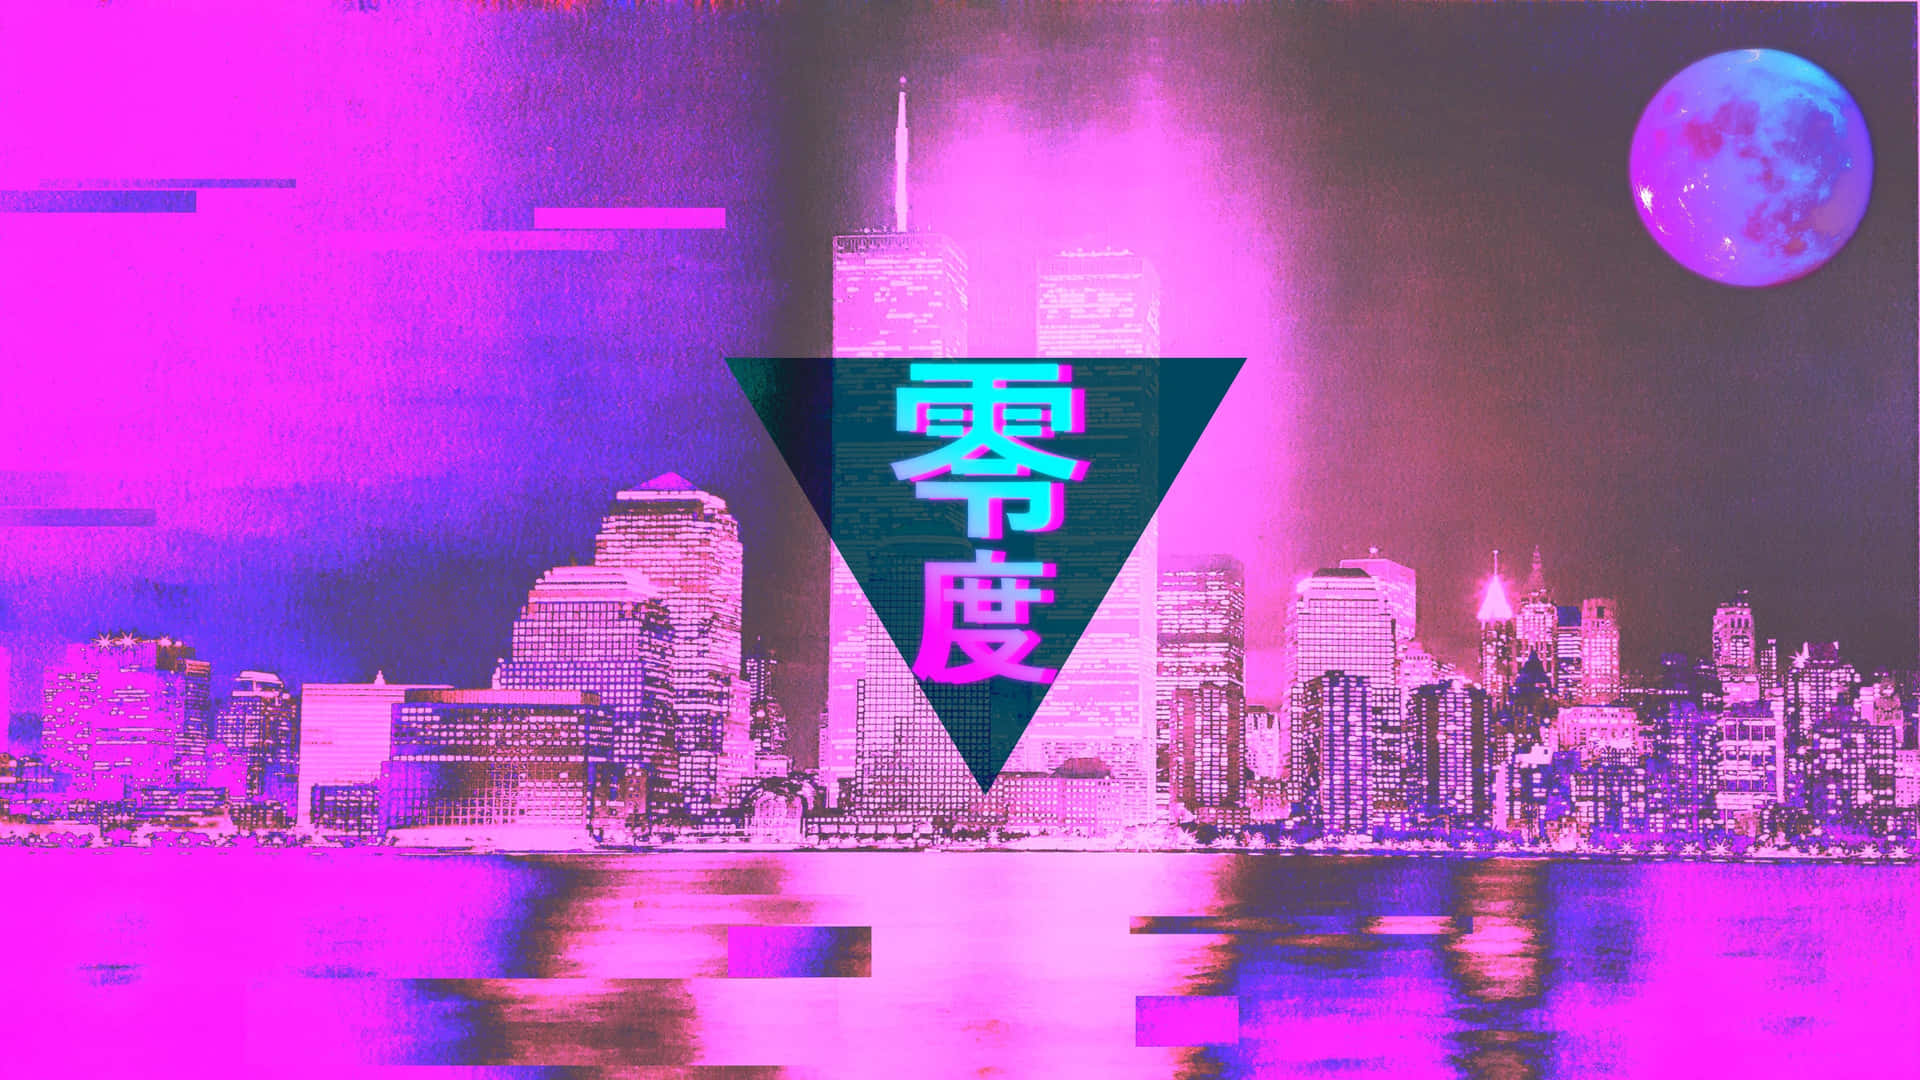 A Pink And Purple Cityscape With The Words Wallpaper